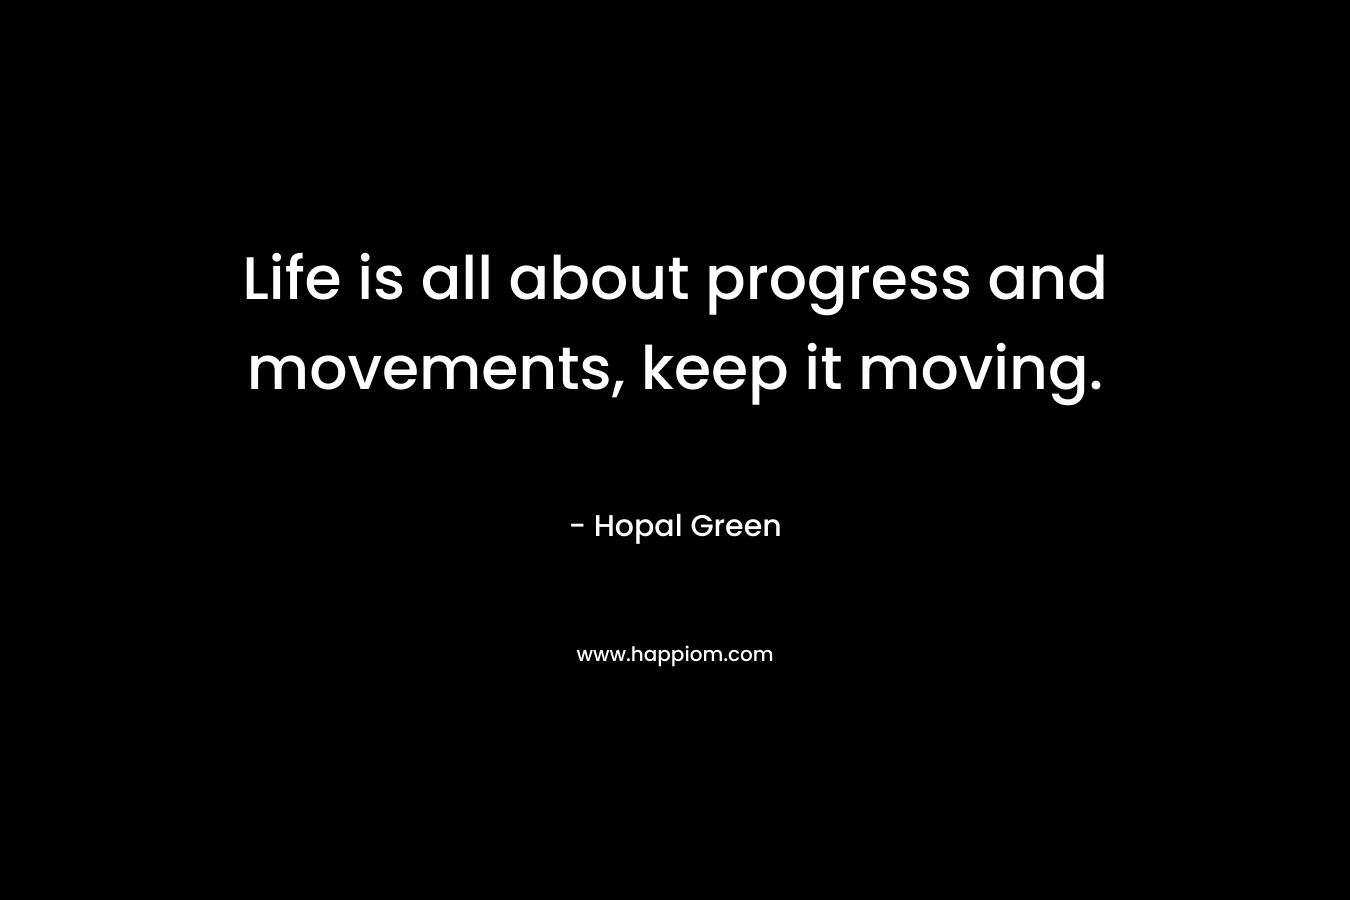 Life is all about progress and movements, keep it moving. – Hopal Green